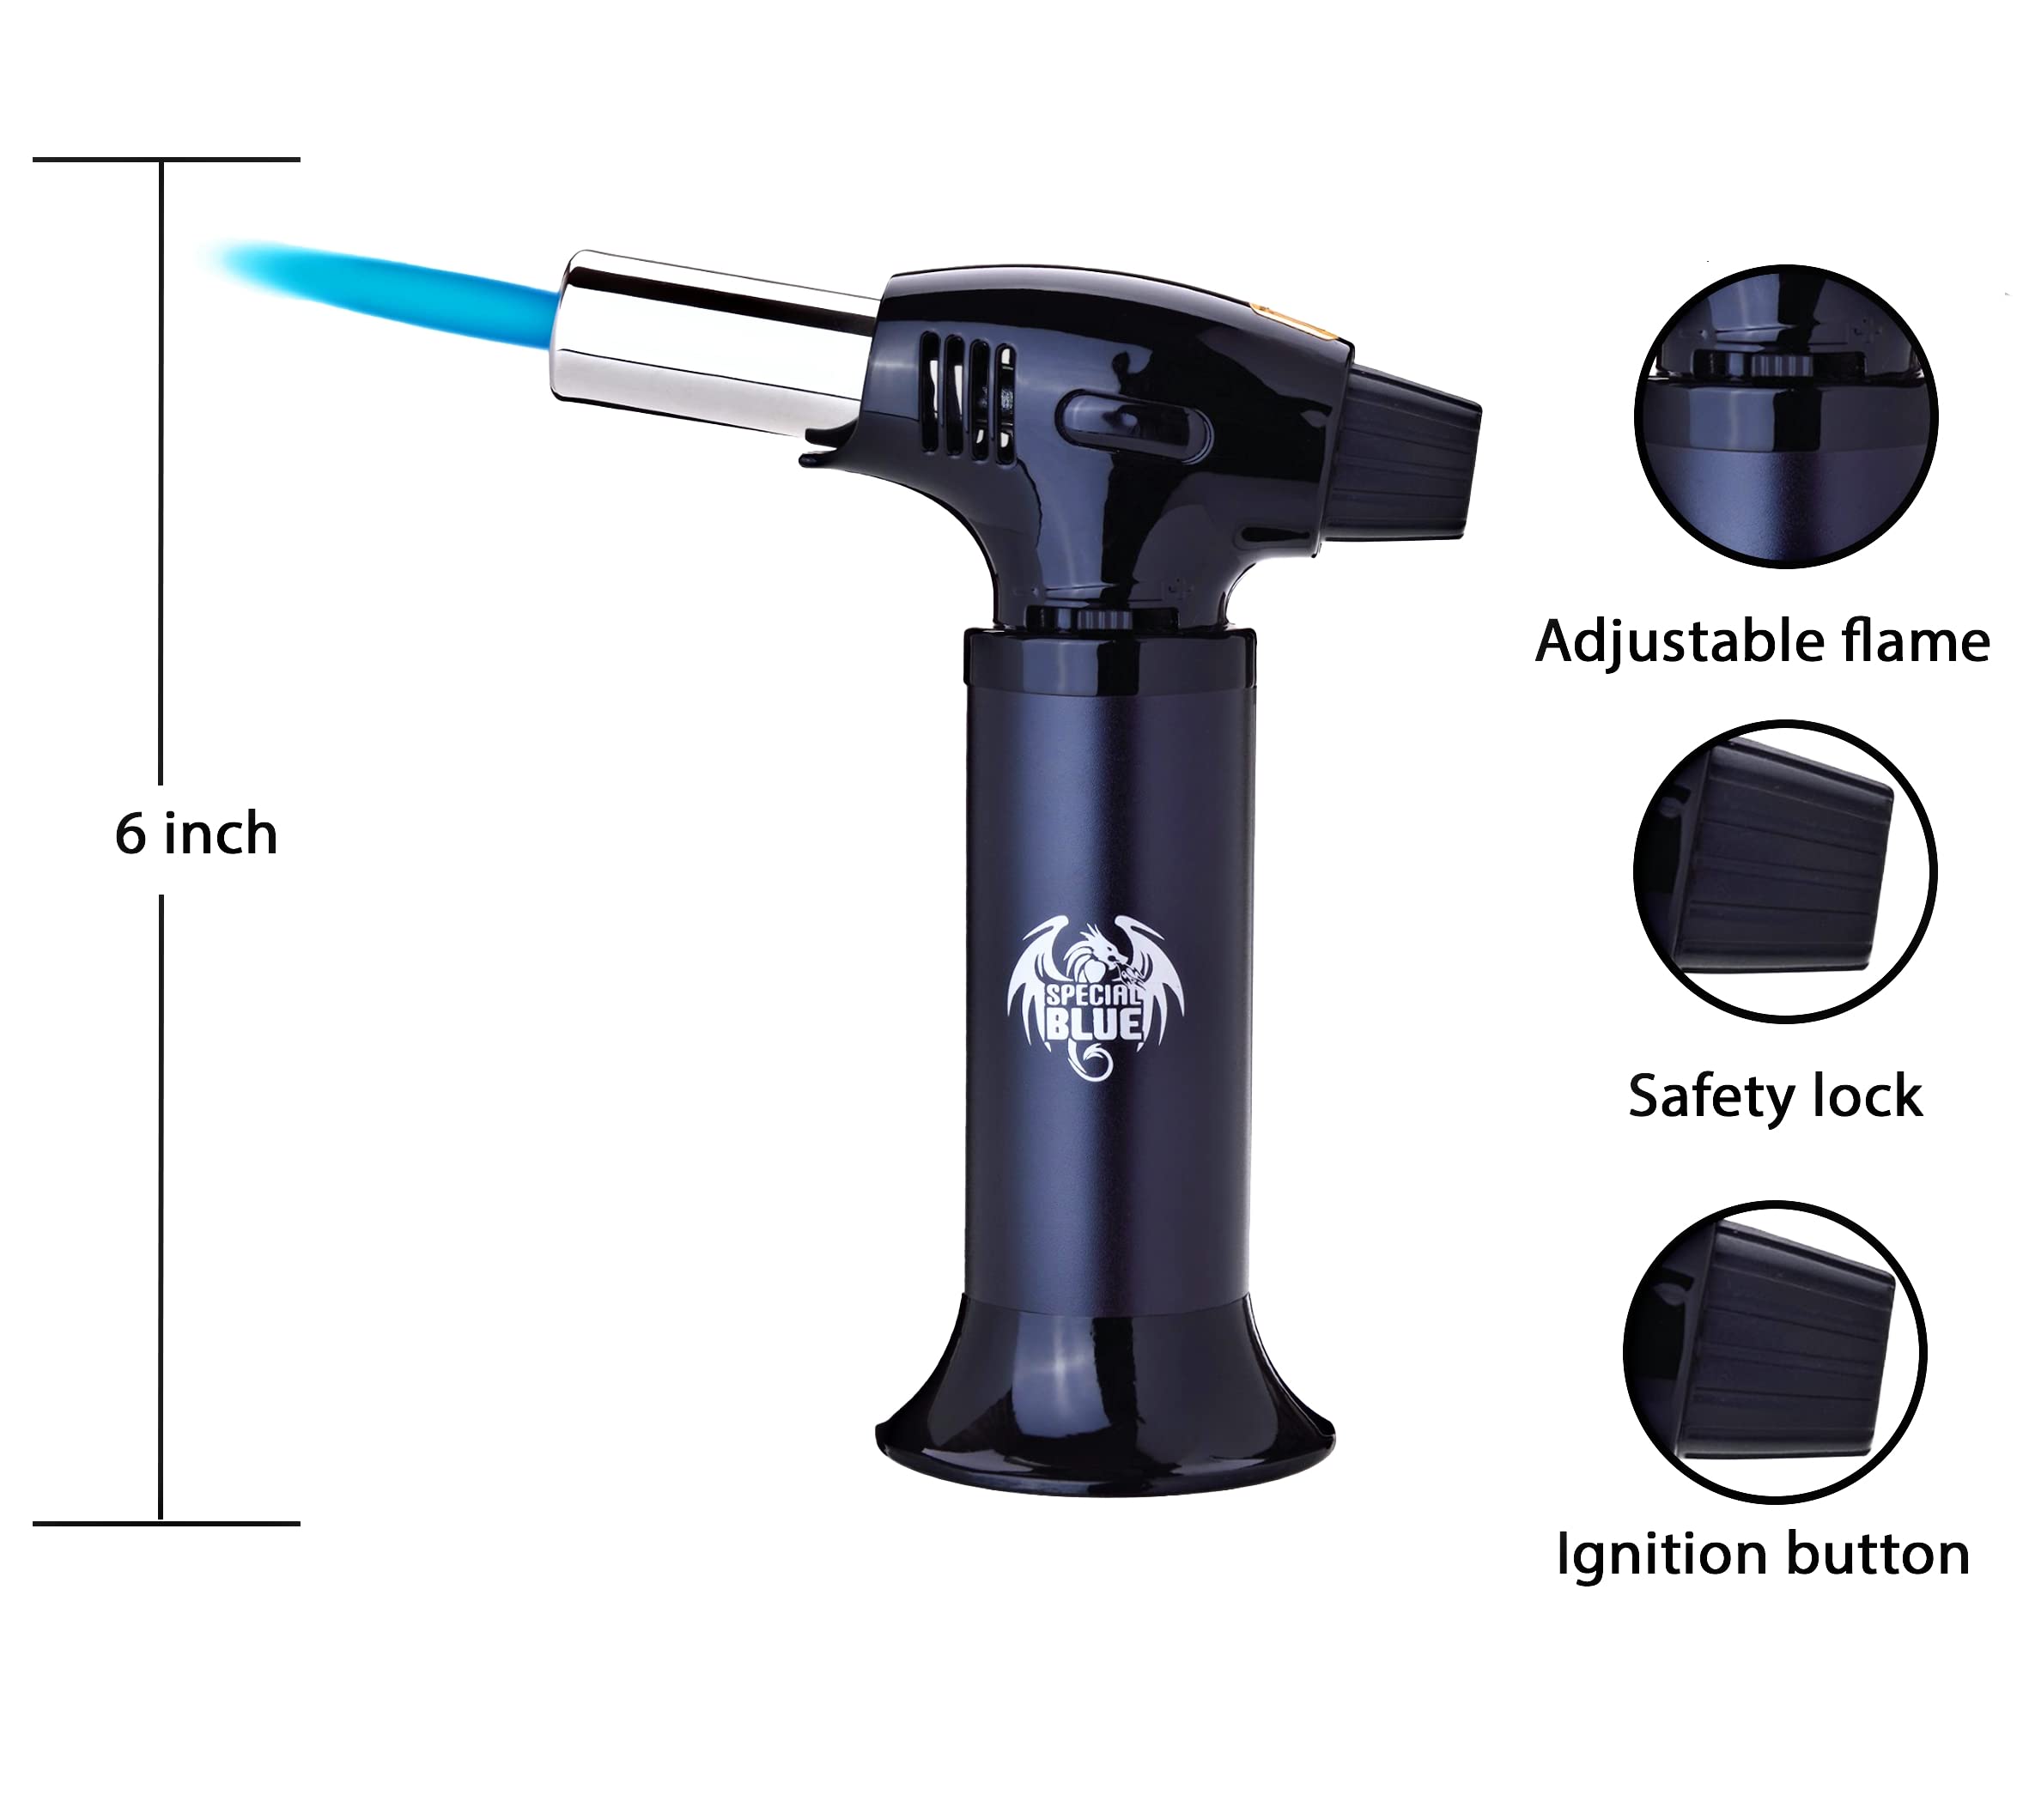 Kitchen Torch, blow torch -Special Blue Refillable Butane Torch With Safety Lock & Adjustable Flame and Fuel gauge - Culinary Torch, Creme Brulée Torch for Cooking Food, Baking, BBQ (Black)